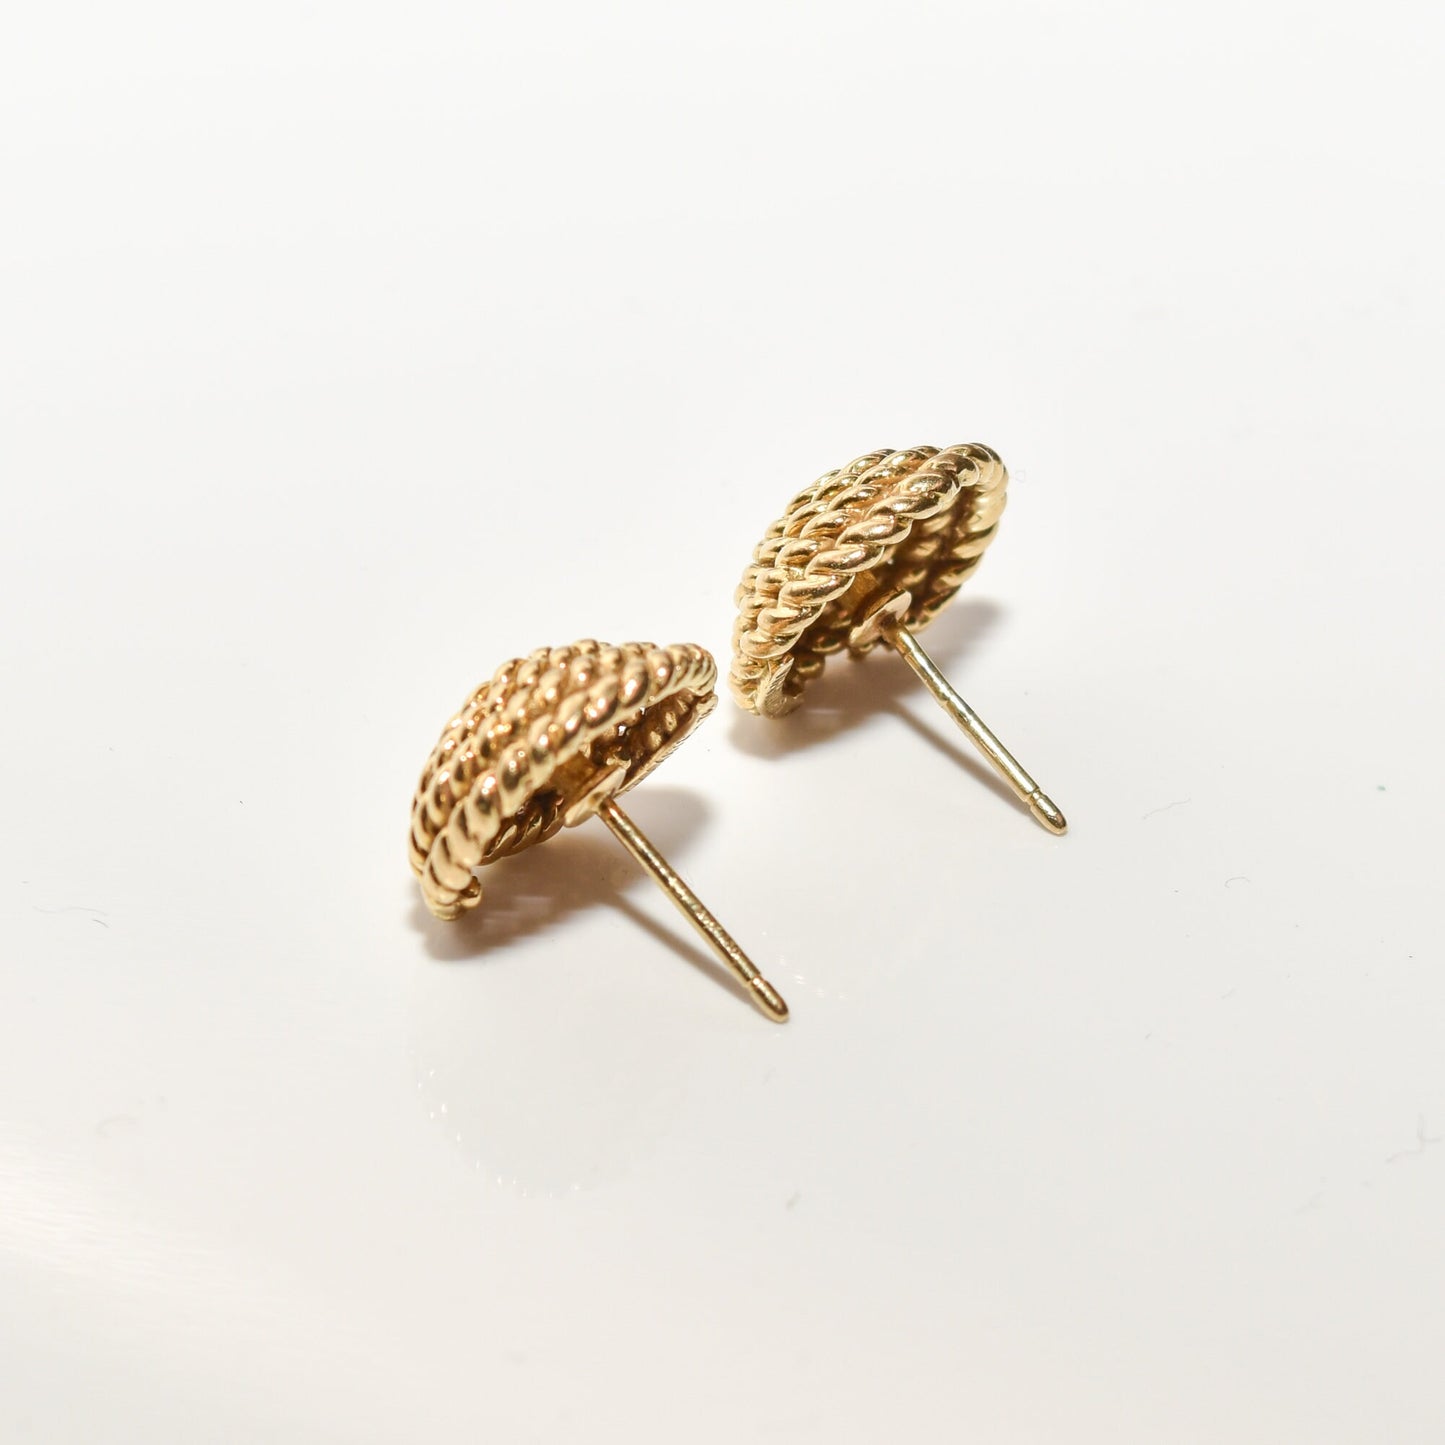 Tiffany & Co. Schlumberger 18K gold woven button stud earrings with a coiled rope design on a white background, luxury estate jewelry, 14.5mm size.